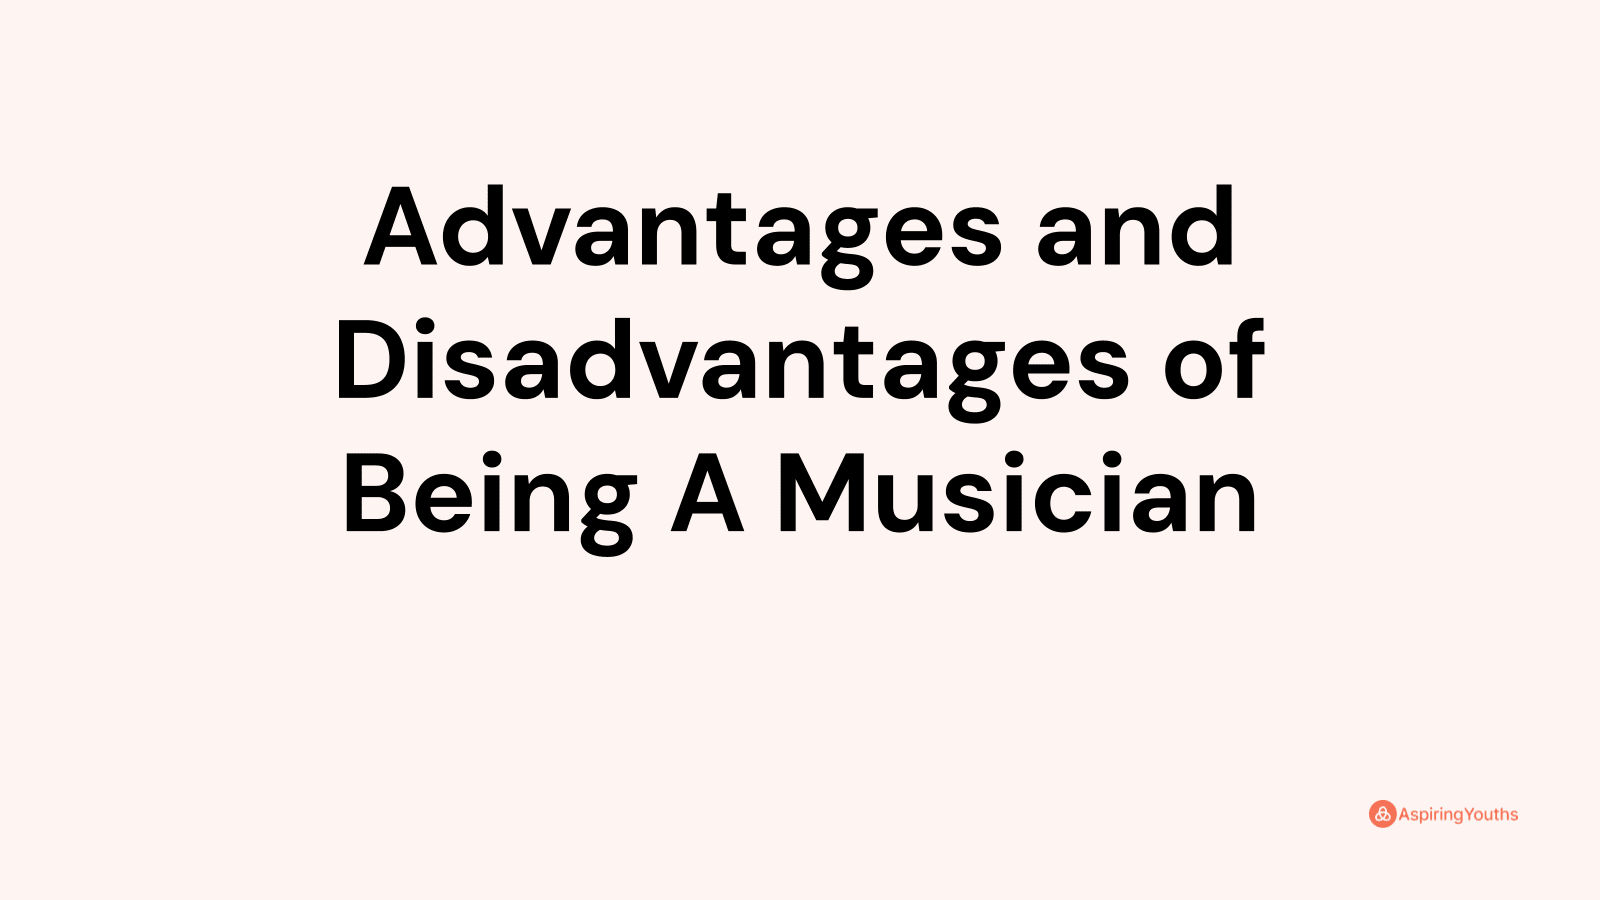 Advantages and disadvantages of Being A Musician